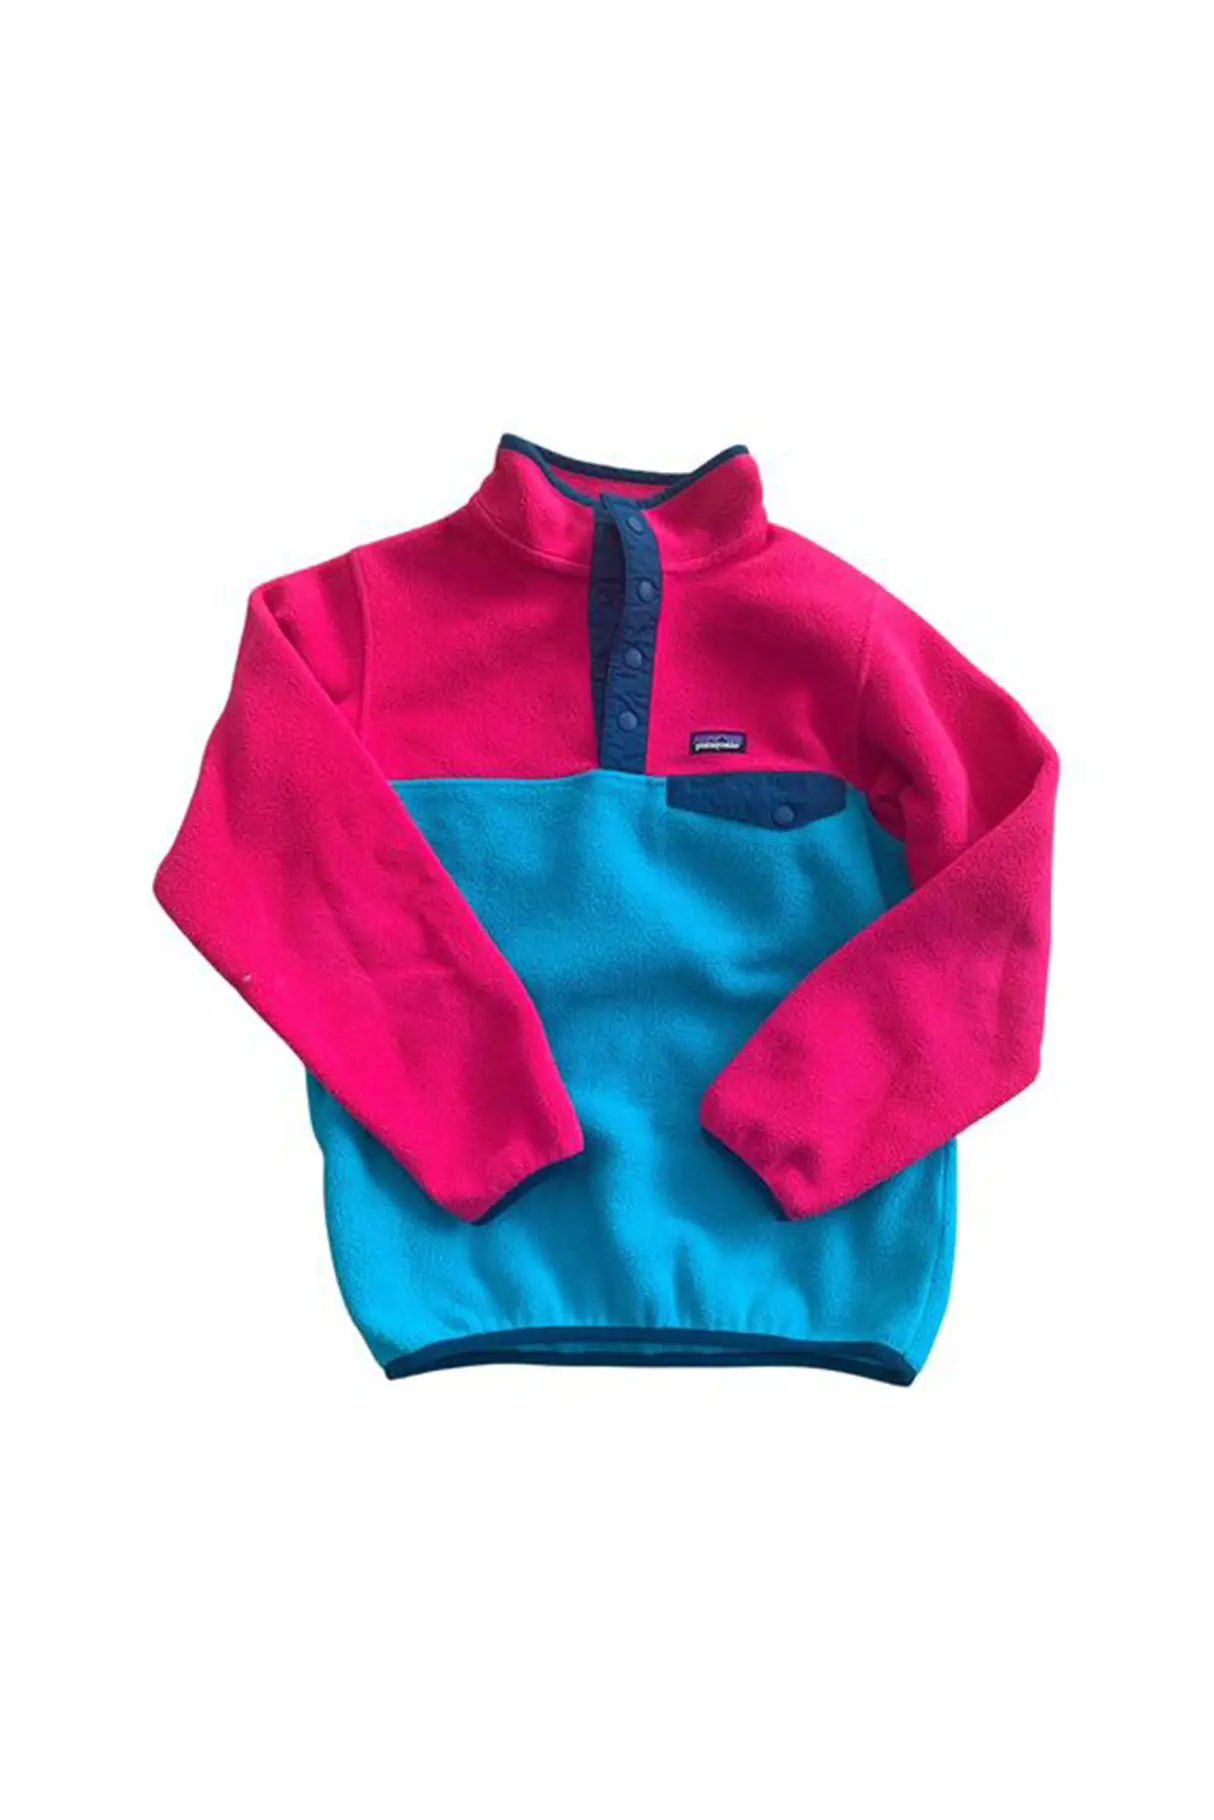 affordable-ethical-blue-pink-top.jpg